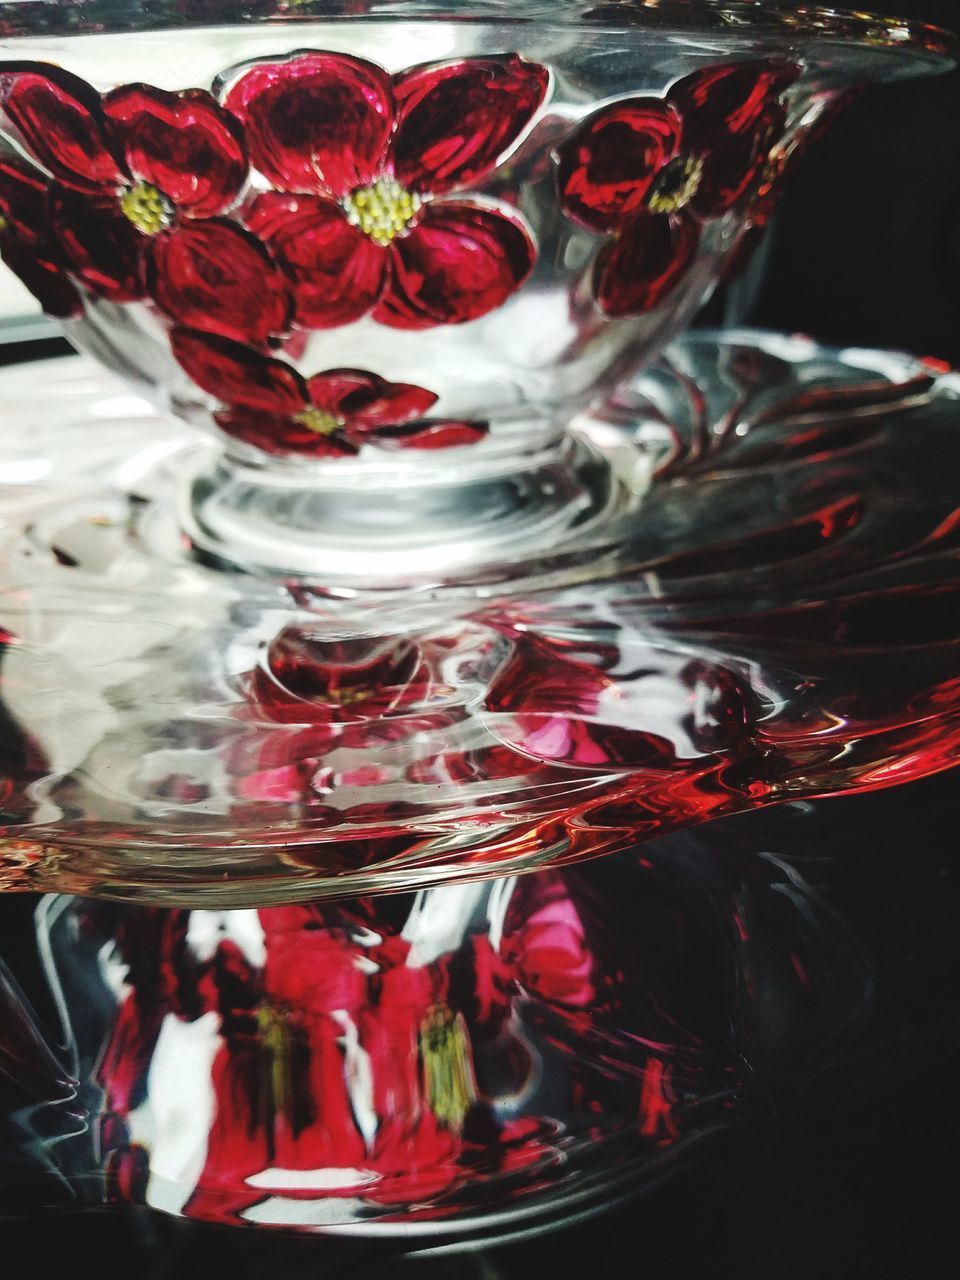 CLOSE-UP OF RED WINE IN GLASS CONTAINER